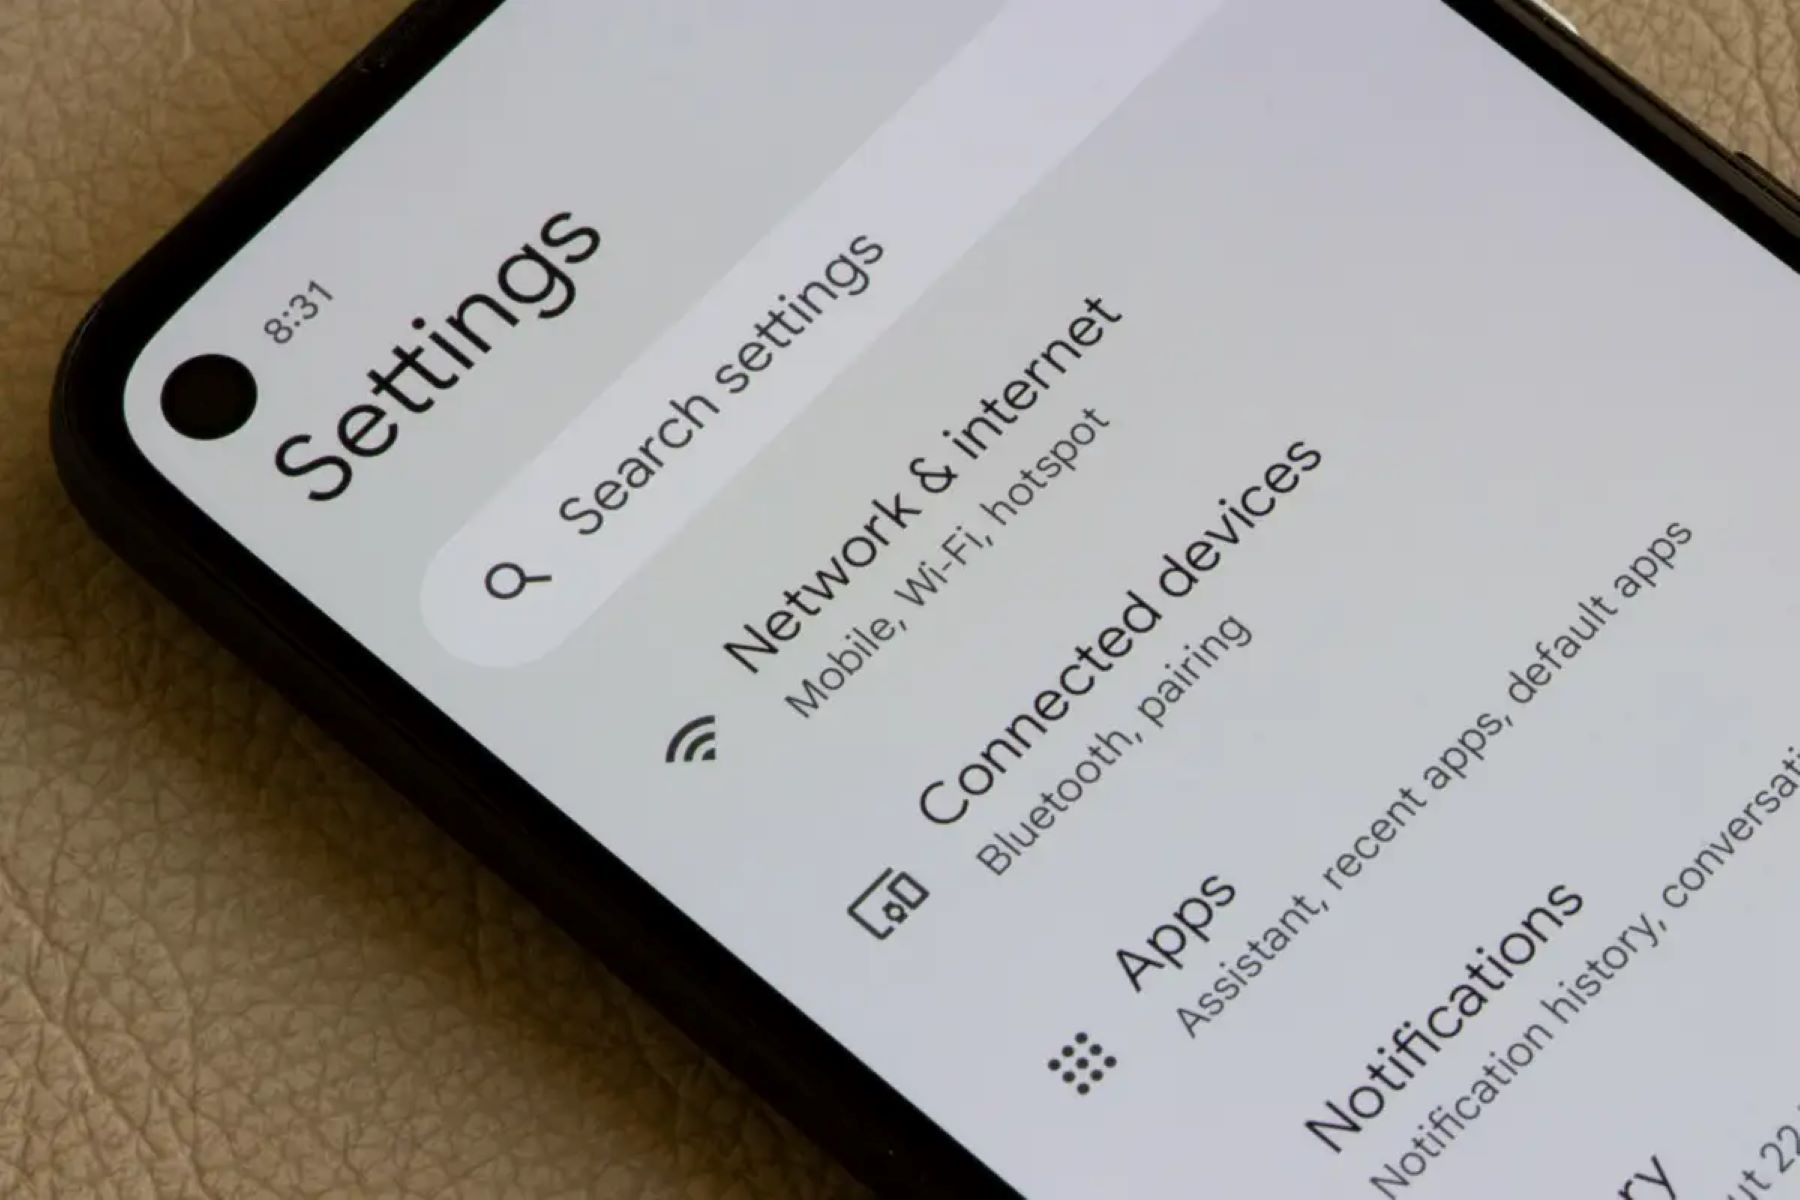 Creating Hotspots: Easy Setup Guide For Xperia Z3